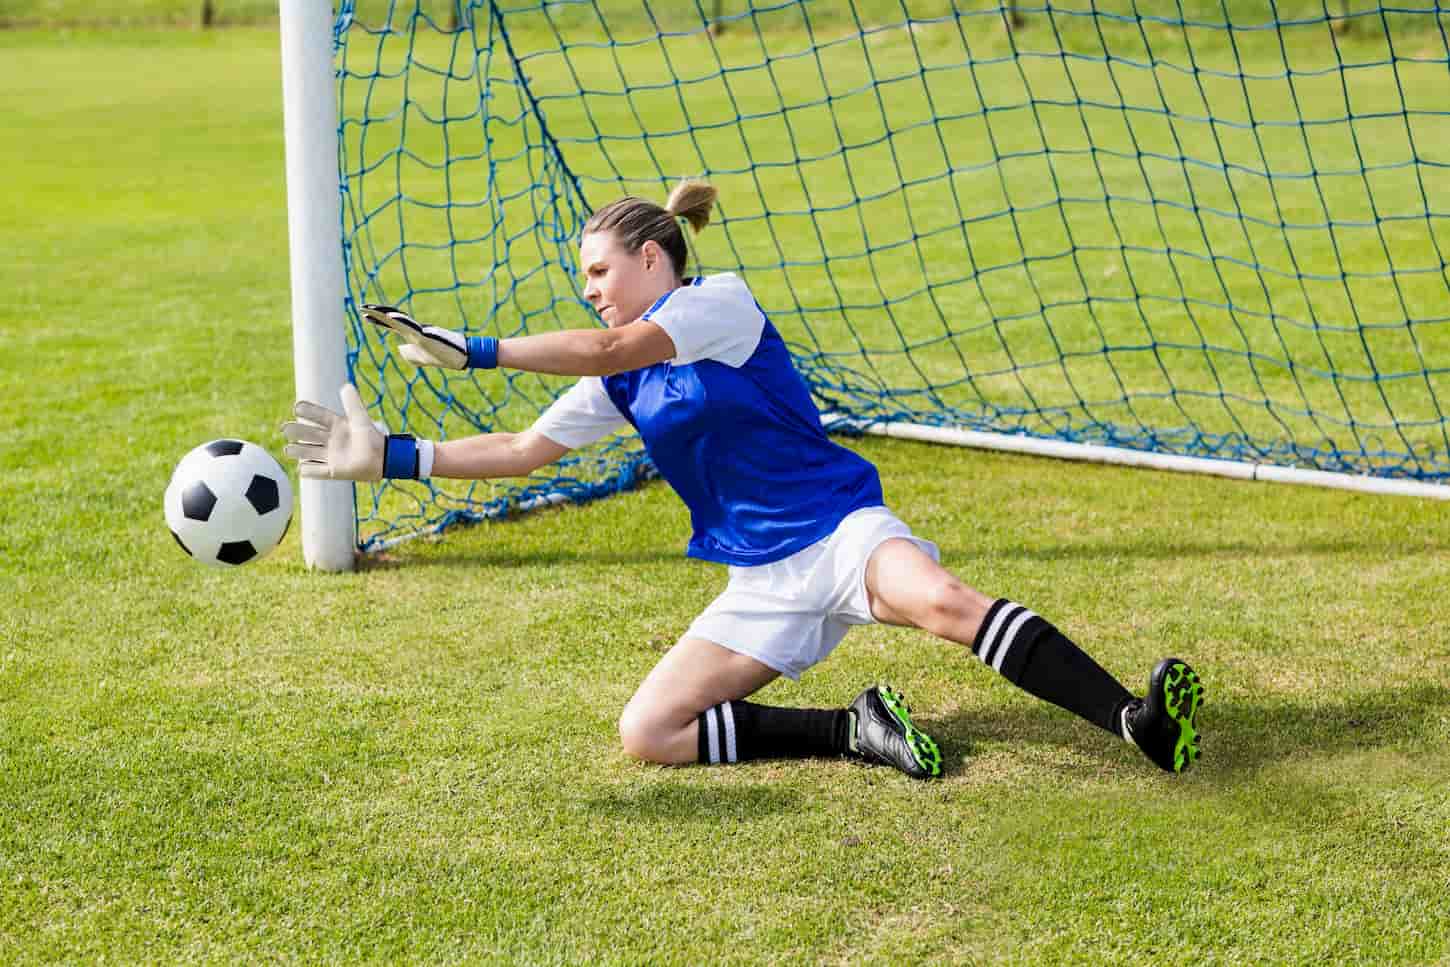 An image of a Female goalkeeper in her complete gear saving a goal during a game.